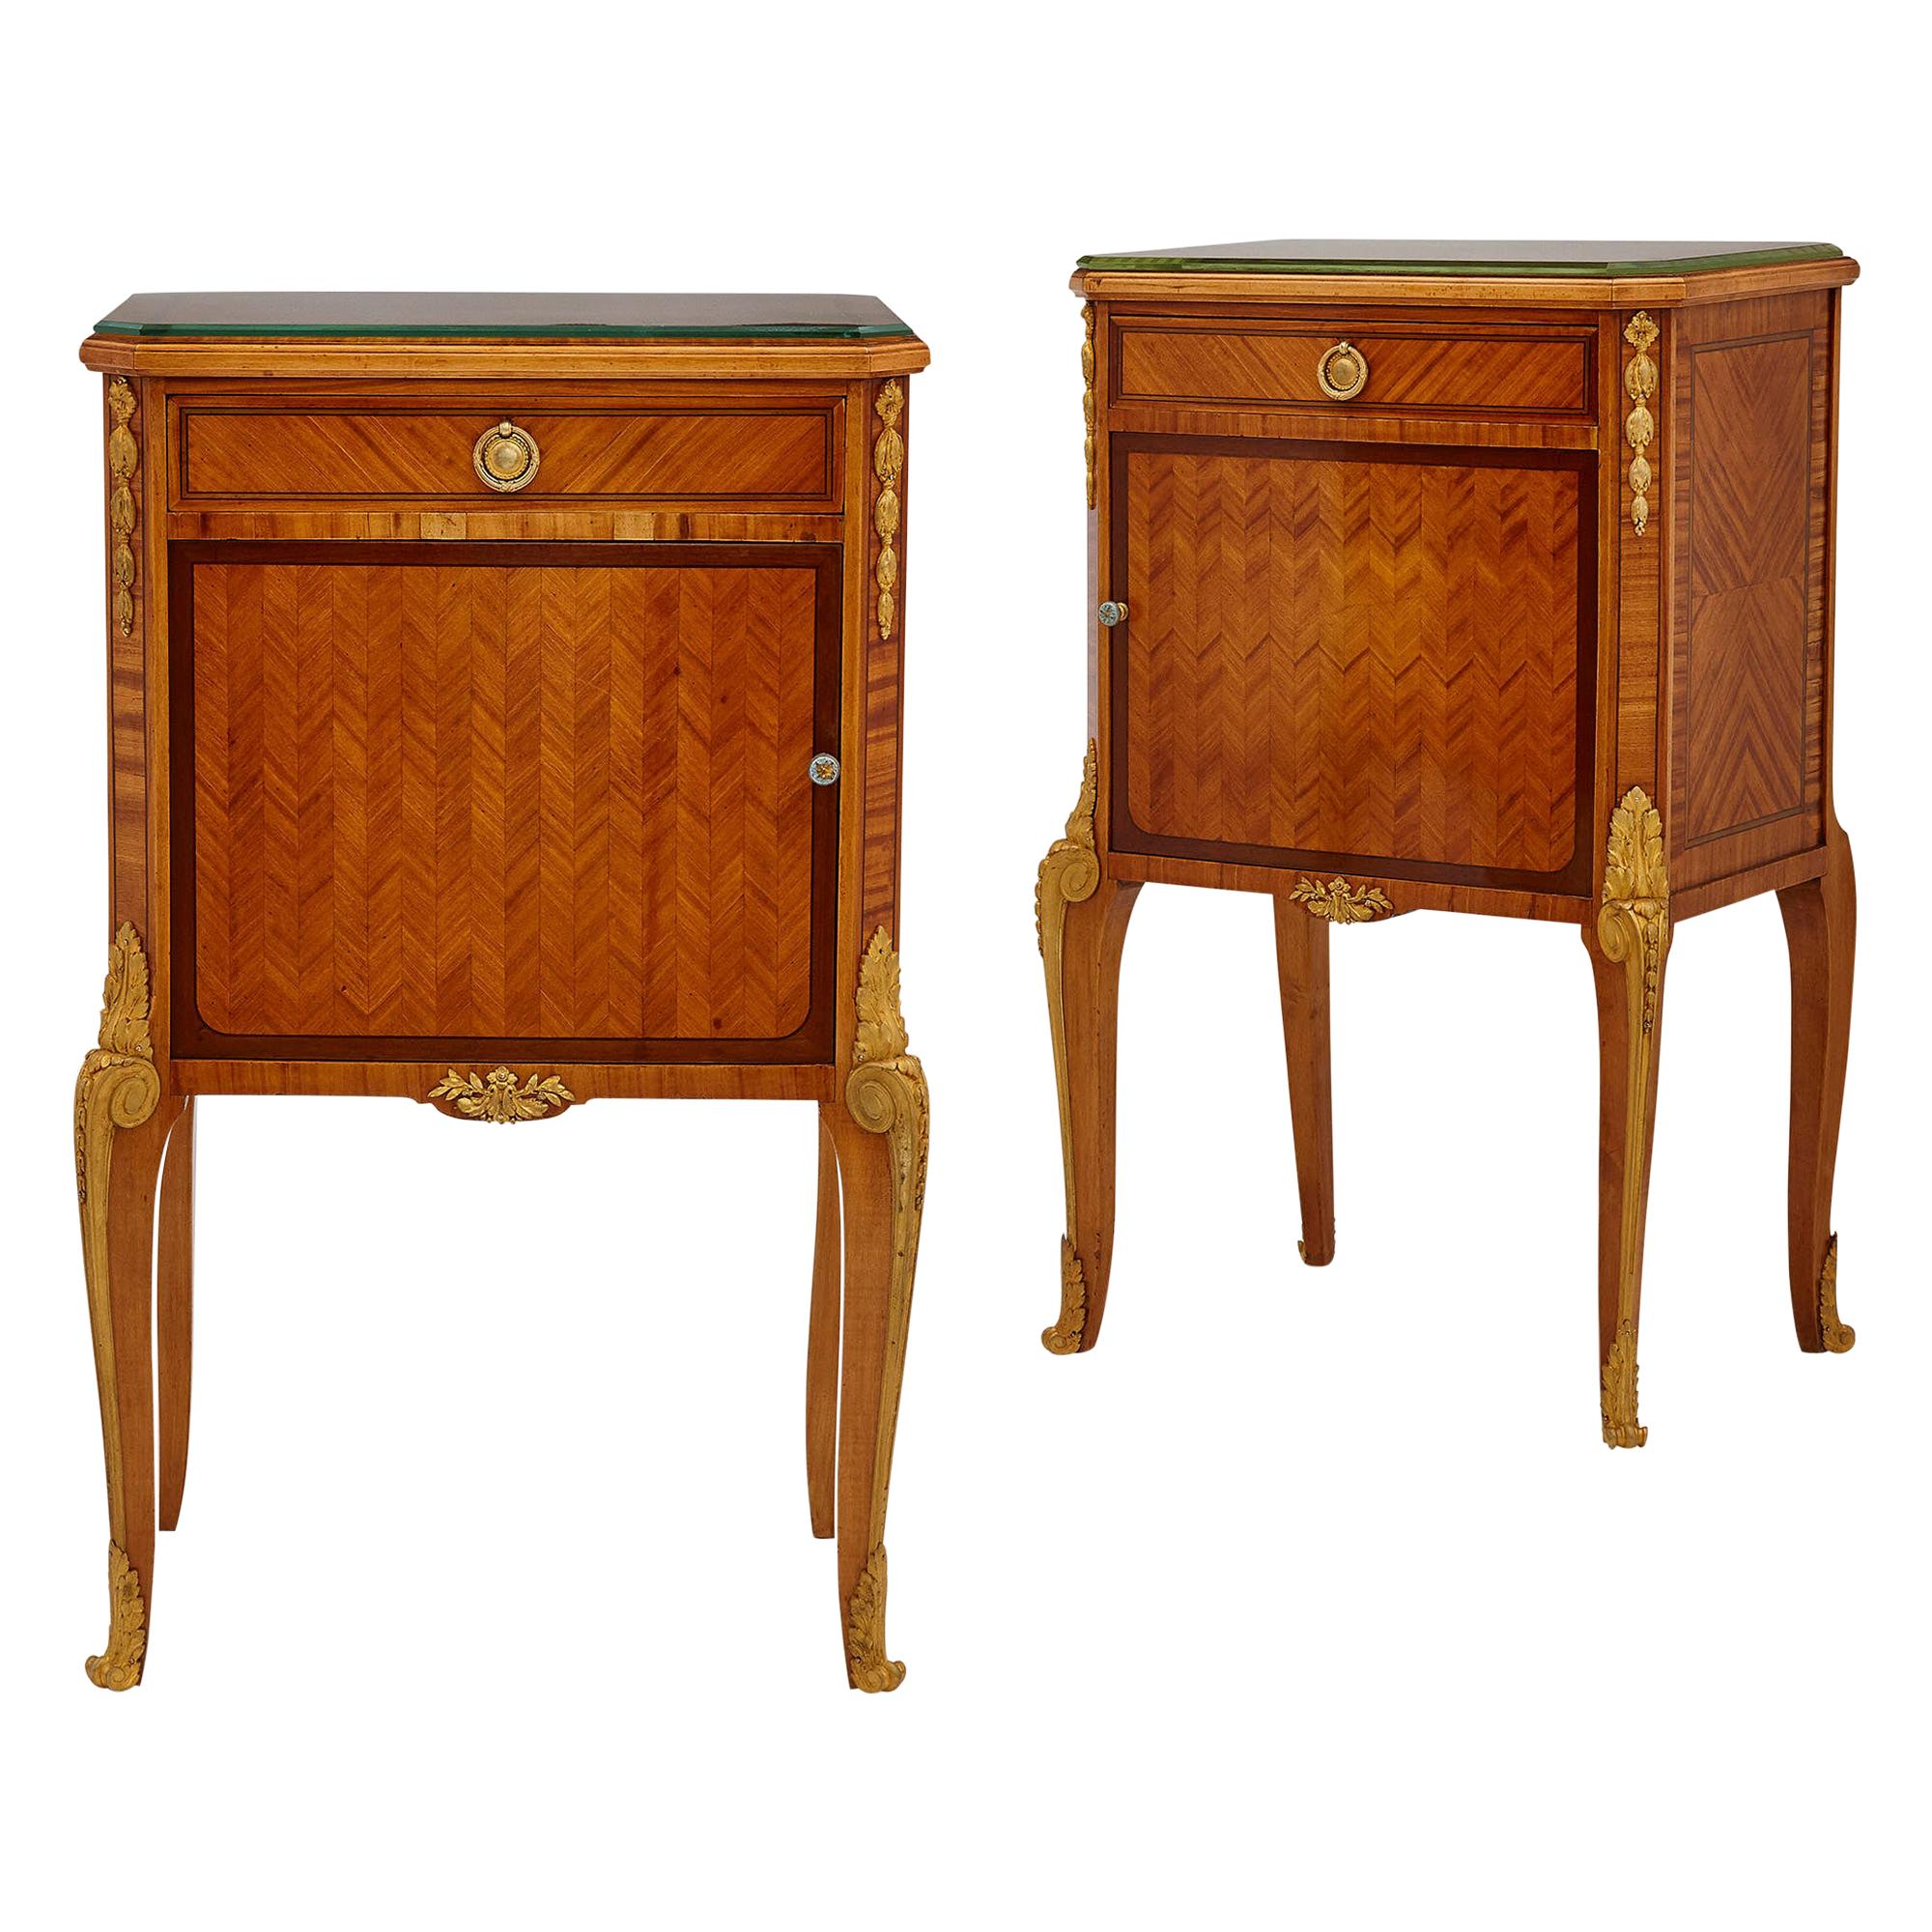 Pair of Neoclassical Style Bedside Cabinets Retailed by Au Gros Chêne